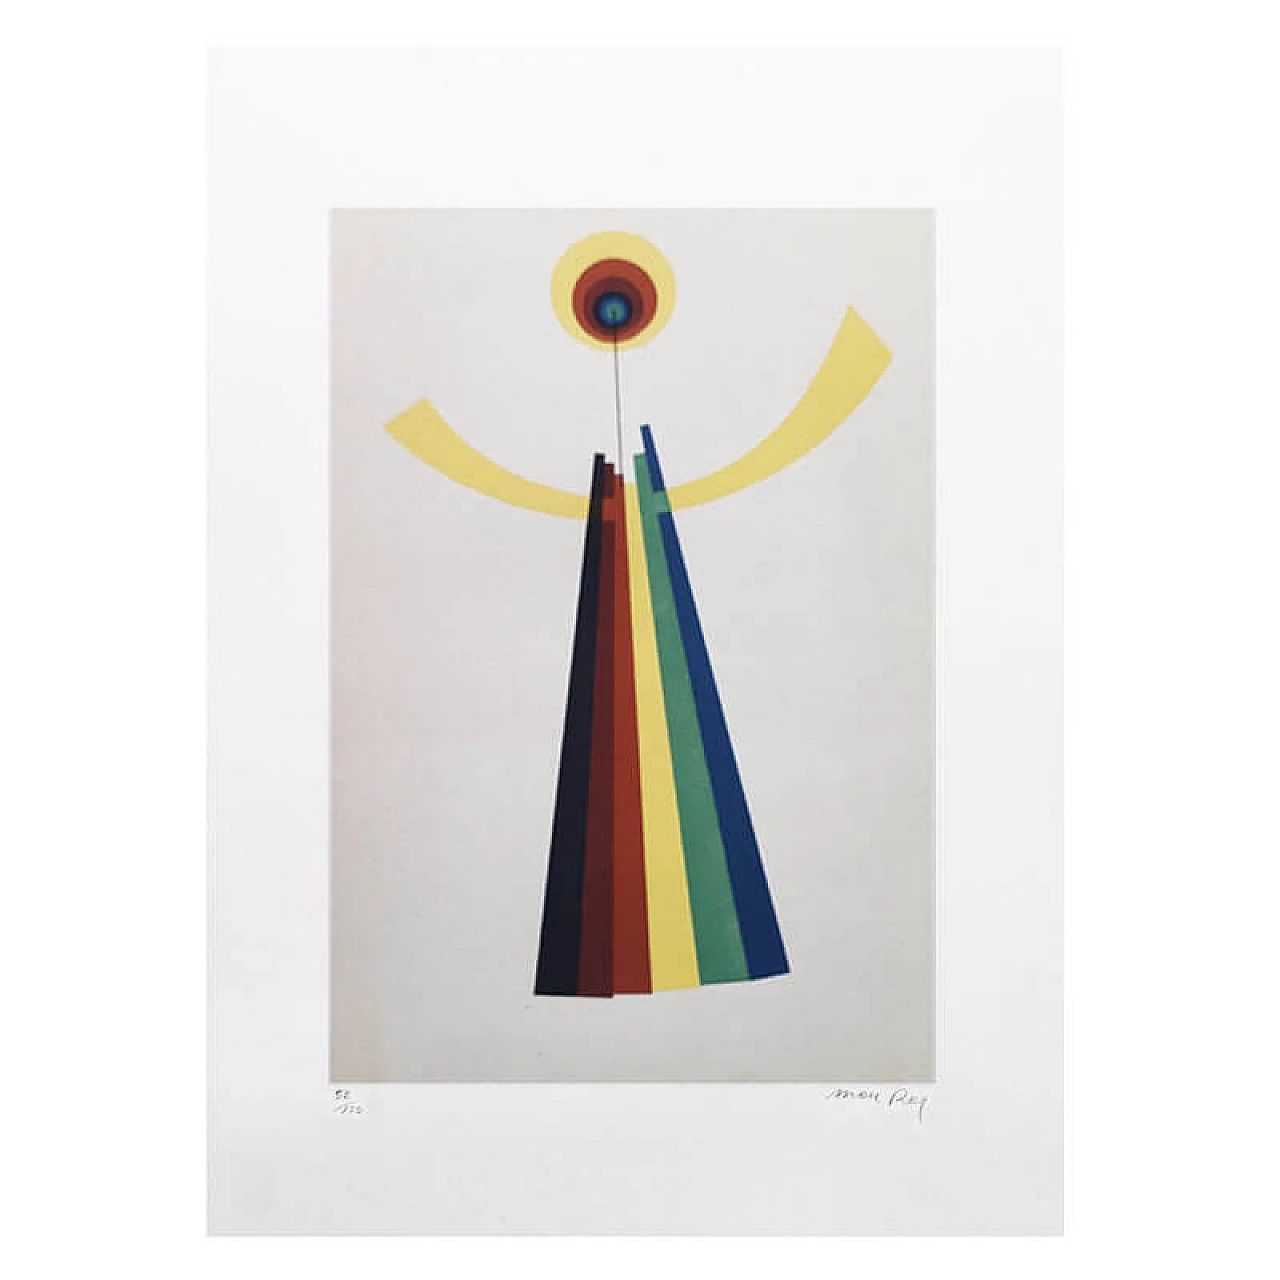 Man Ray, the mime, limited edition lithograph, 1972 1